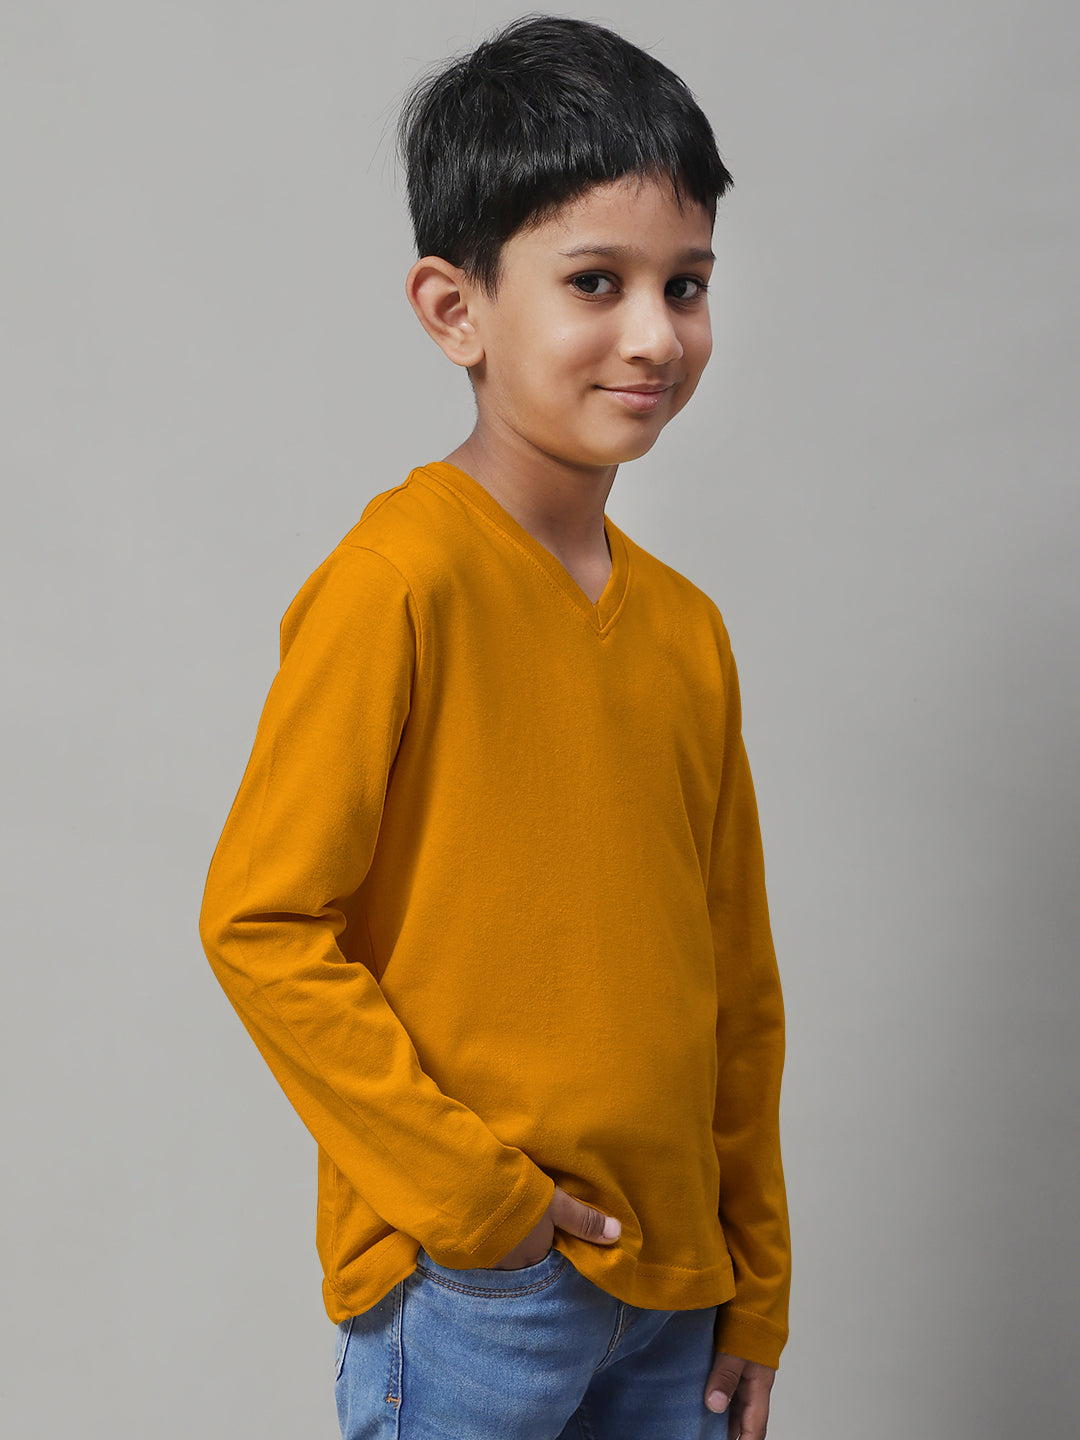 Classic Full Sleeves V-Neck Solid 7-12Y Kids T-Shirt - Friskers